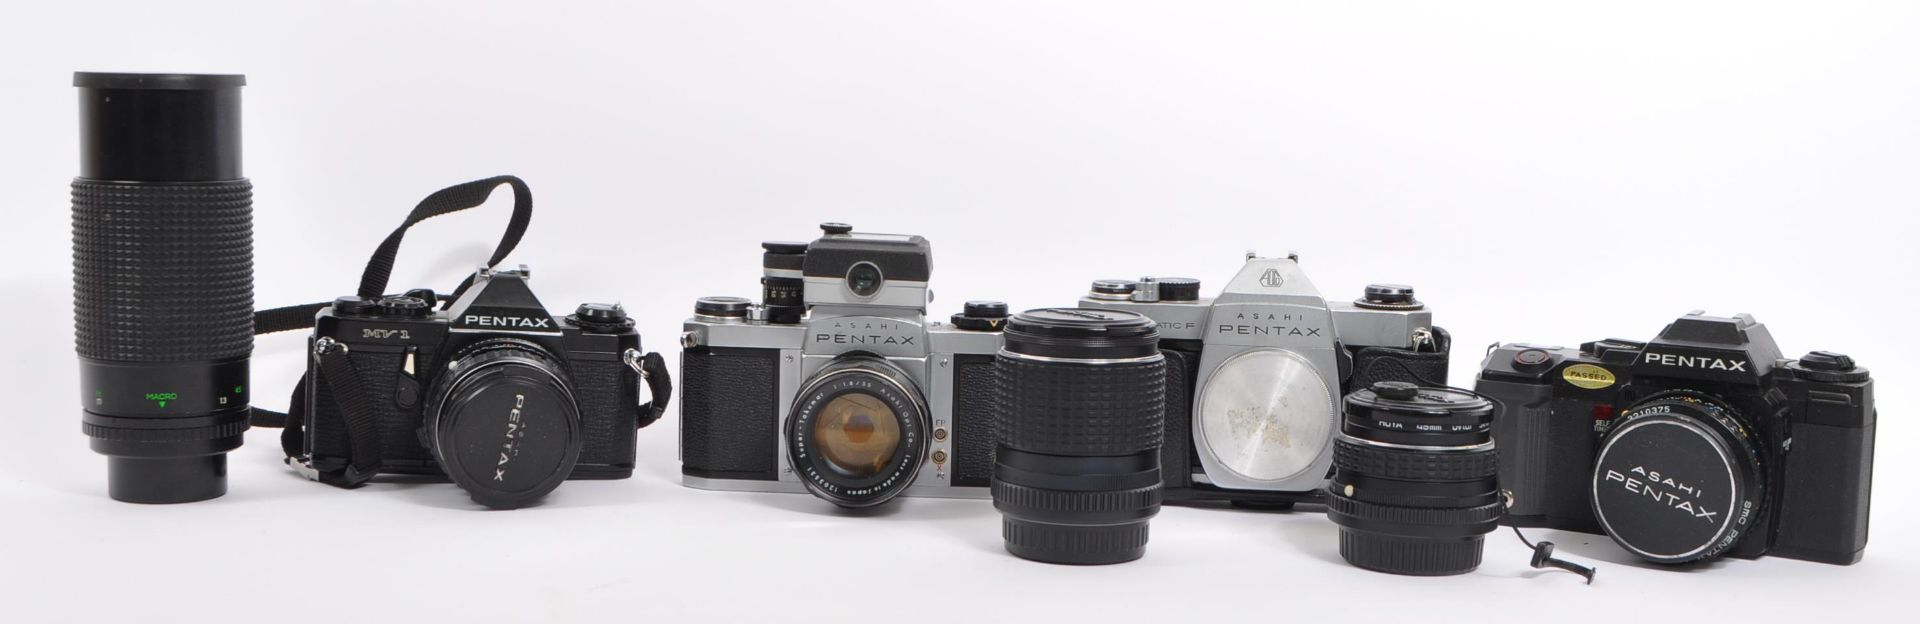 COLLECTION OF PENTAX 35MM CAMERAS AND LENSES